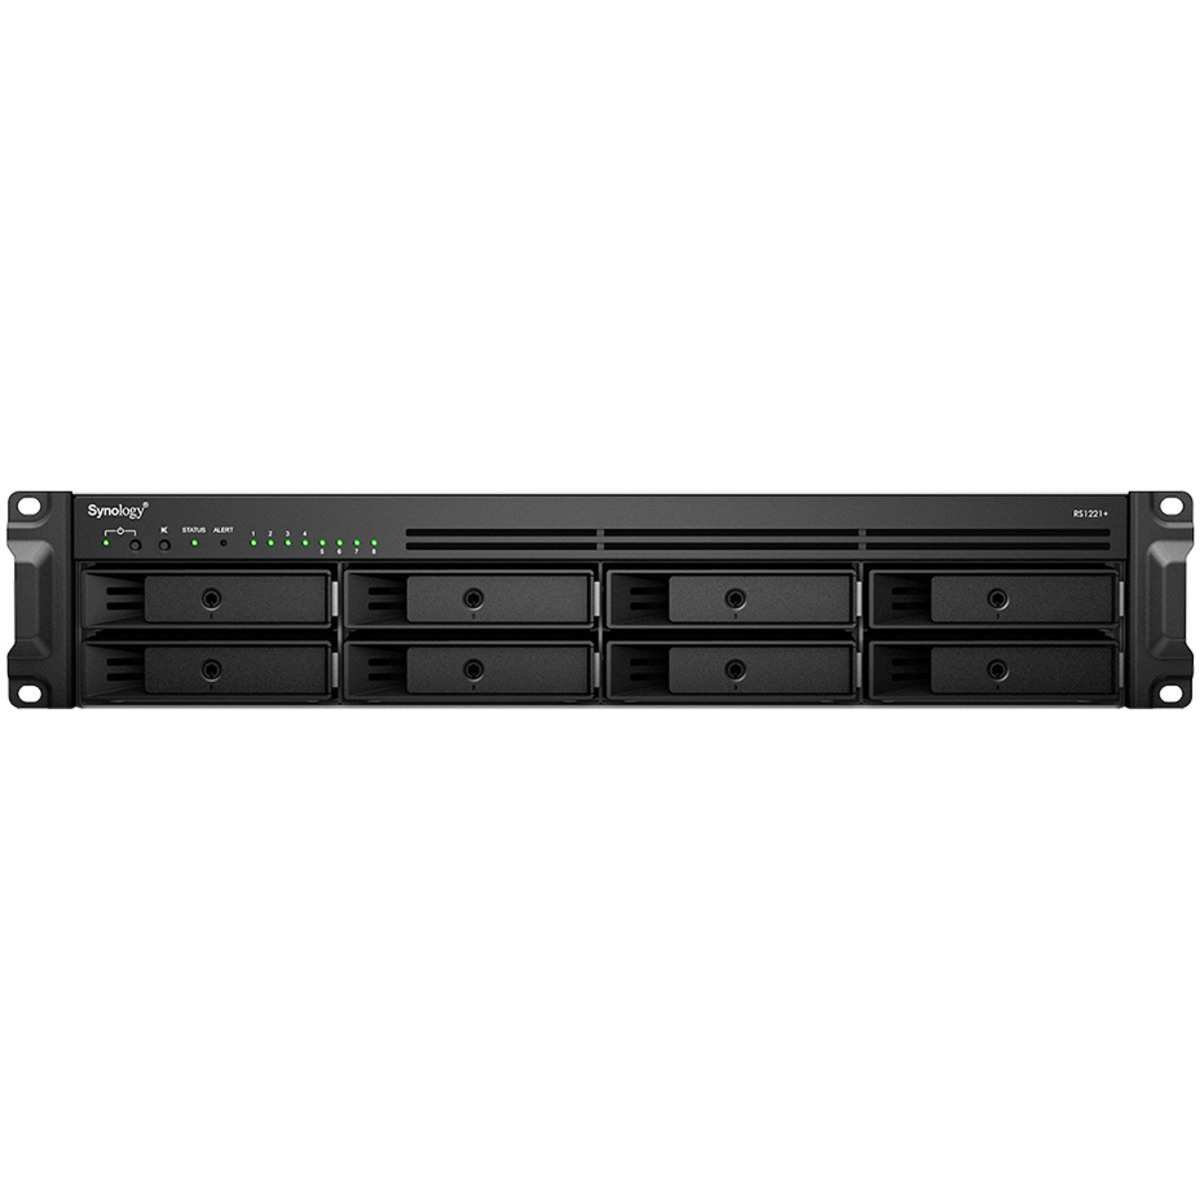 buy $5156 Synology RackStation RS1221+ 144tb RackMount NAS - Network Attached Storage Device 8x18000gb Toshiba Enterprise Capacity MG09ACA18TE 3.5 7200rpm SATA 6Gb/s HDD ENTERPRISE Class Drives Installed - Burn-In Tested - nas headquarters buy network attached storage server device das new raid-5 free shipping usa christmas new year holiday sale RackStation RS1221+